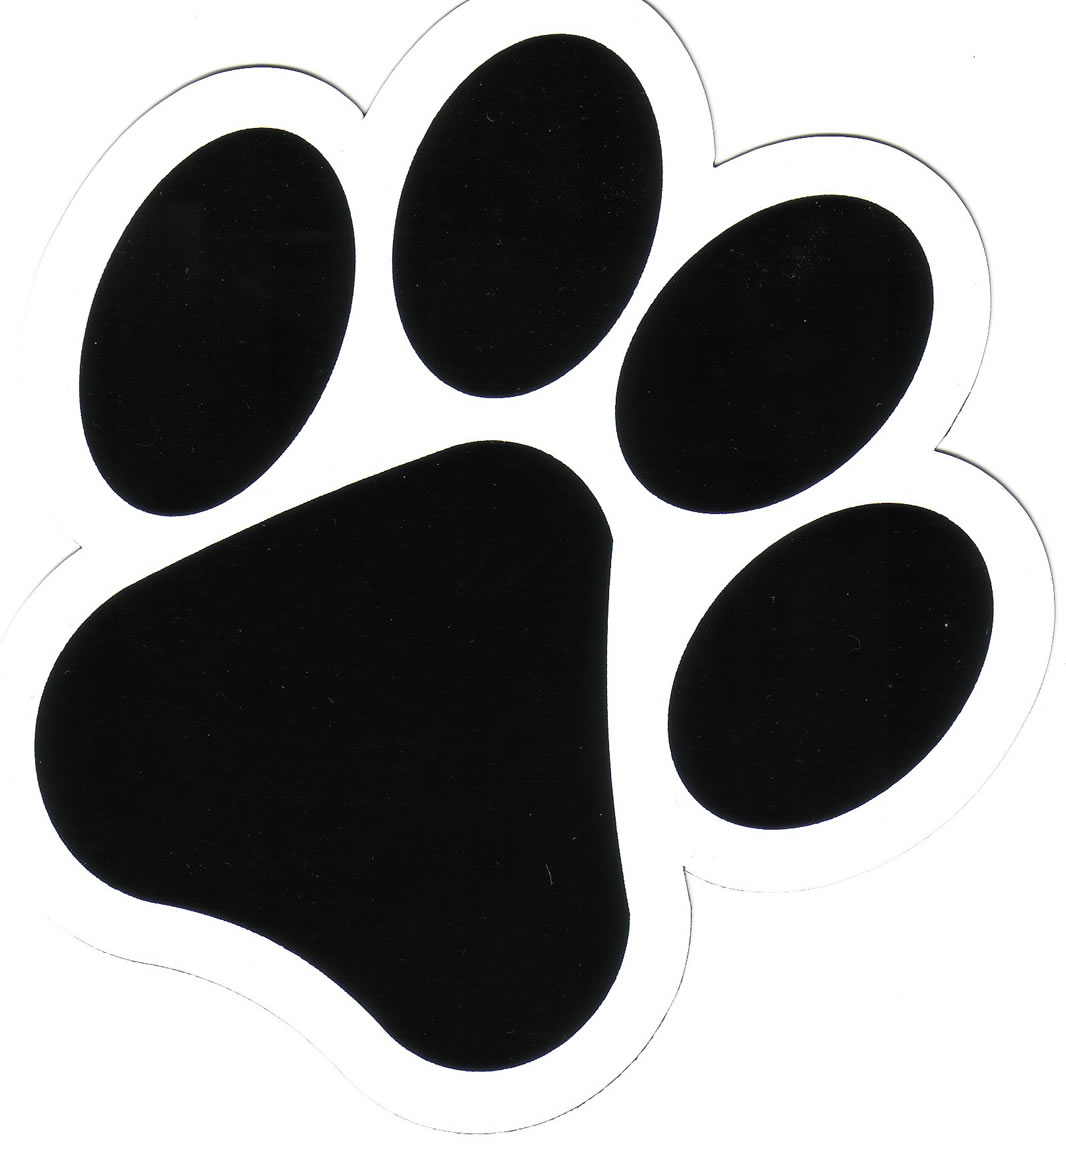 Paw Wallpaper Clipart